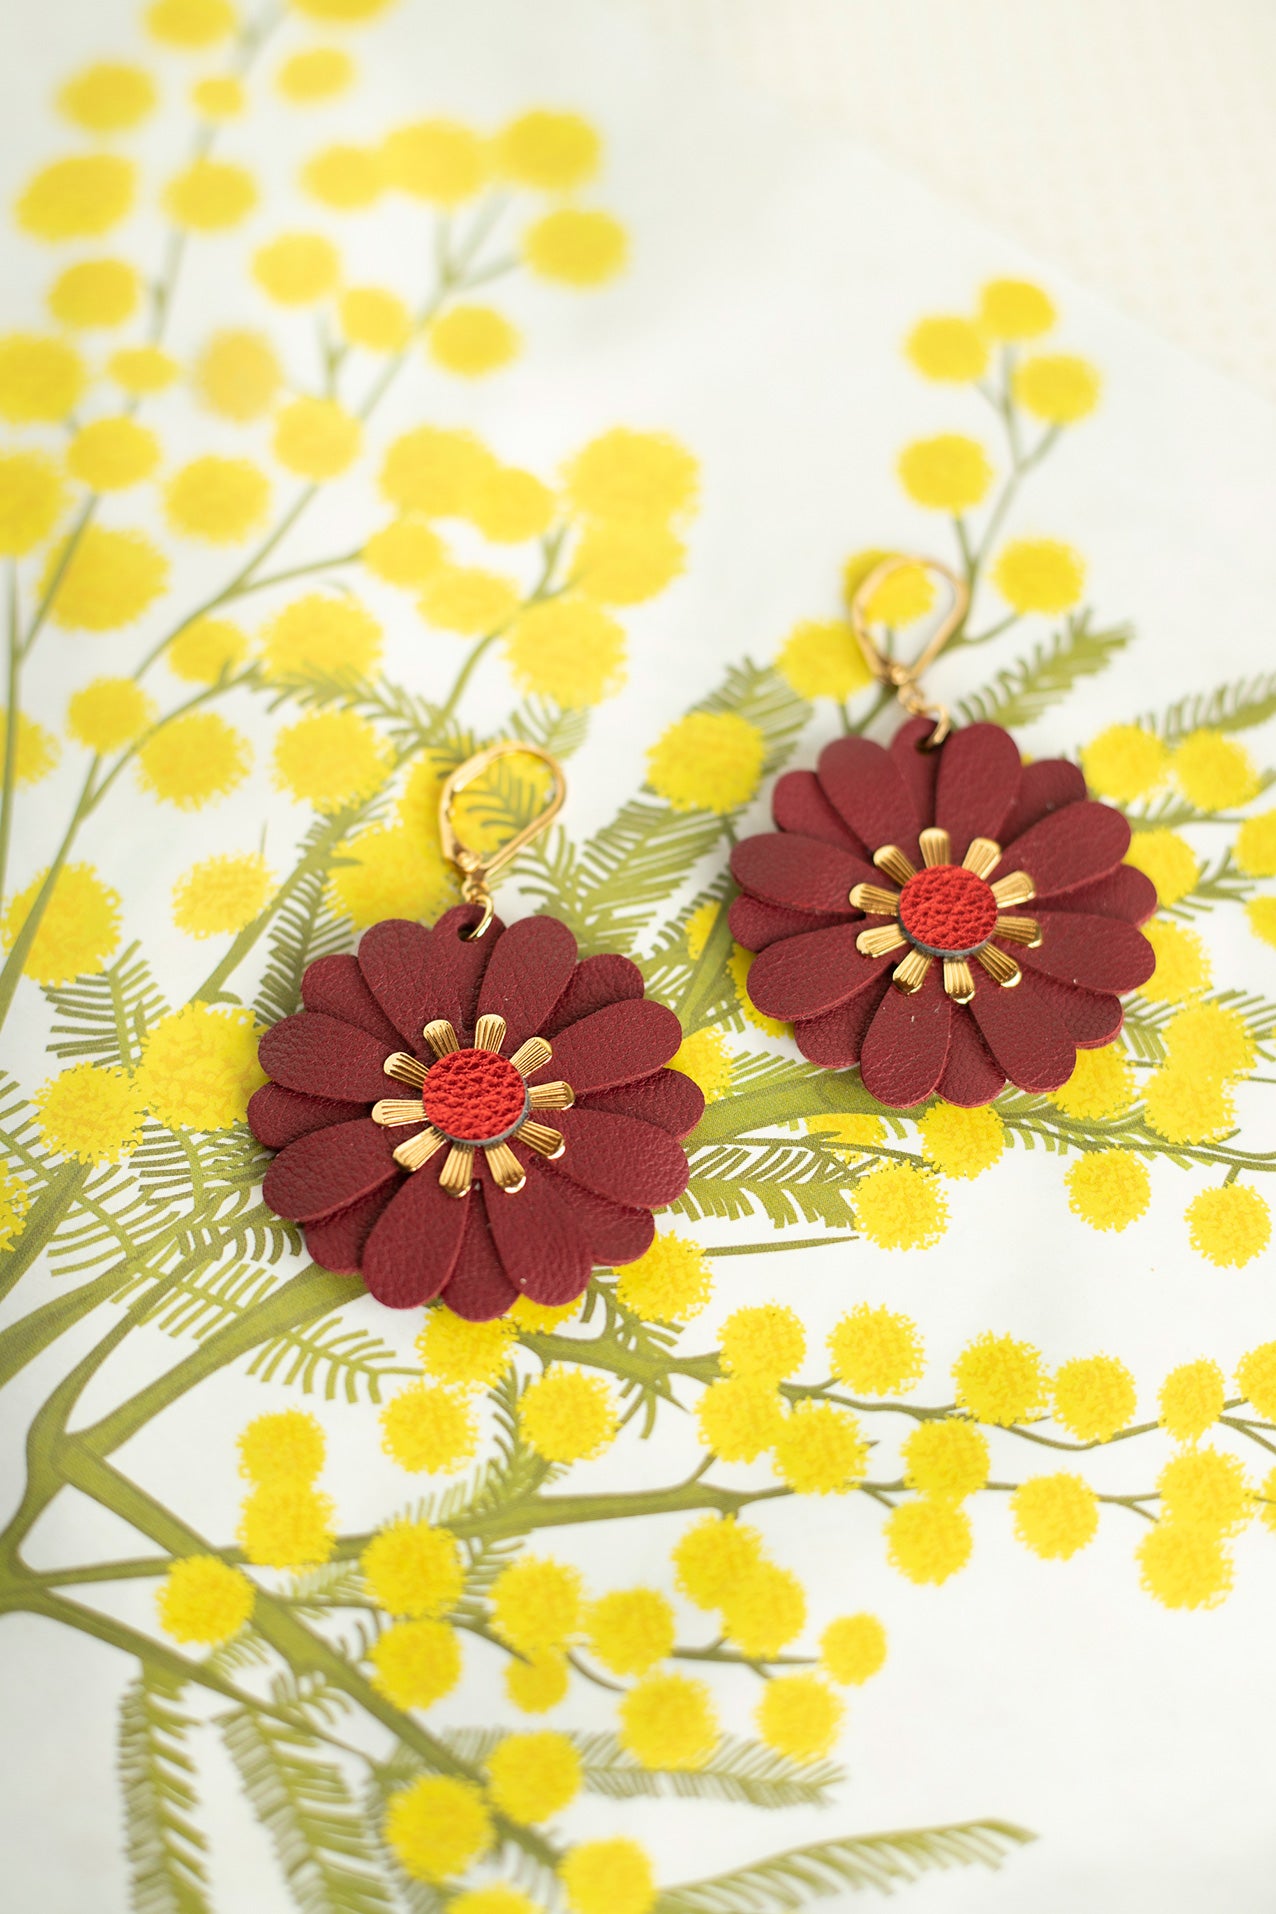 Zinnia flower earrings - Burgundy red leather and metallic red